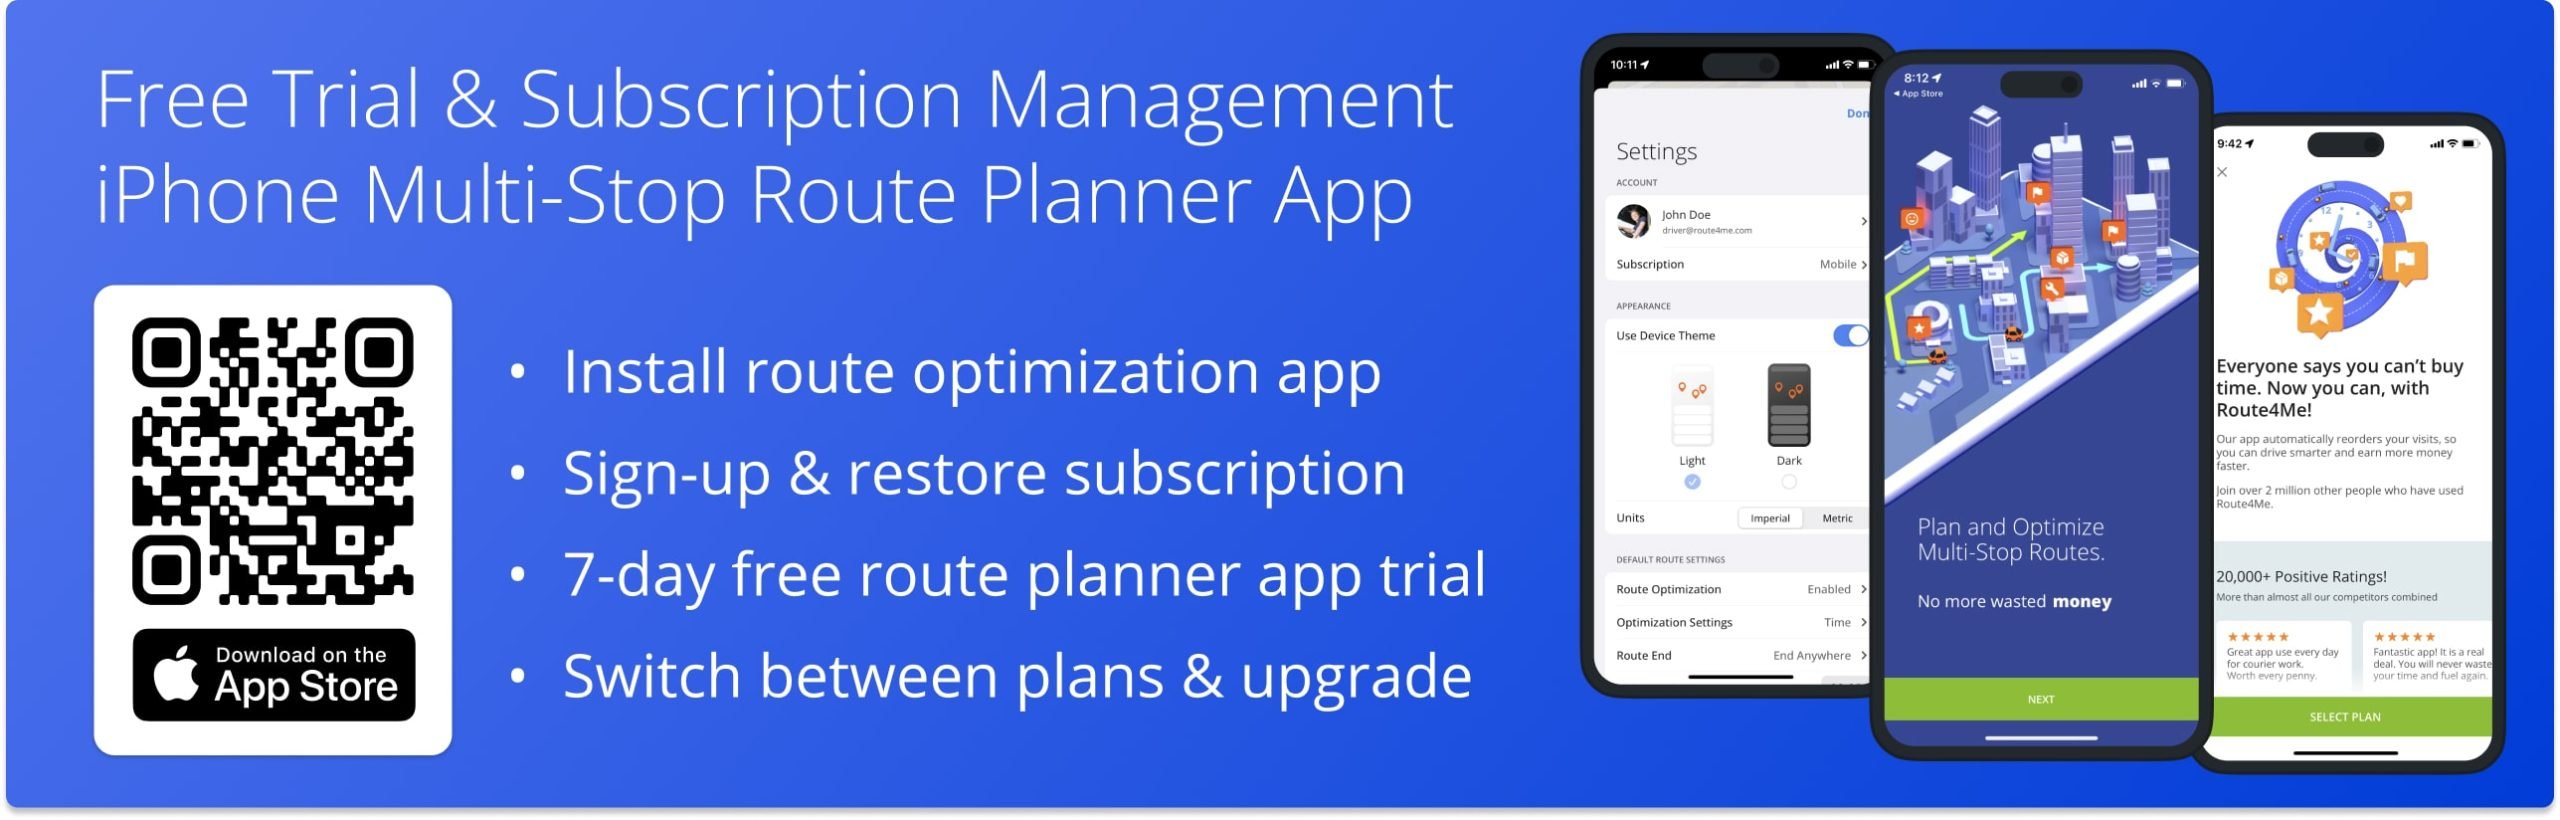 Free route planner app trial and subscription management on Route4Me's iPhone Multi-Stop Route Optimization app.